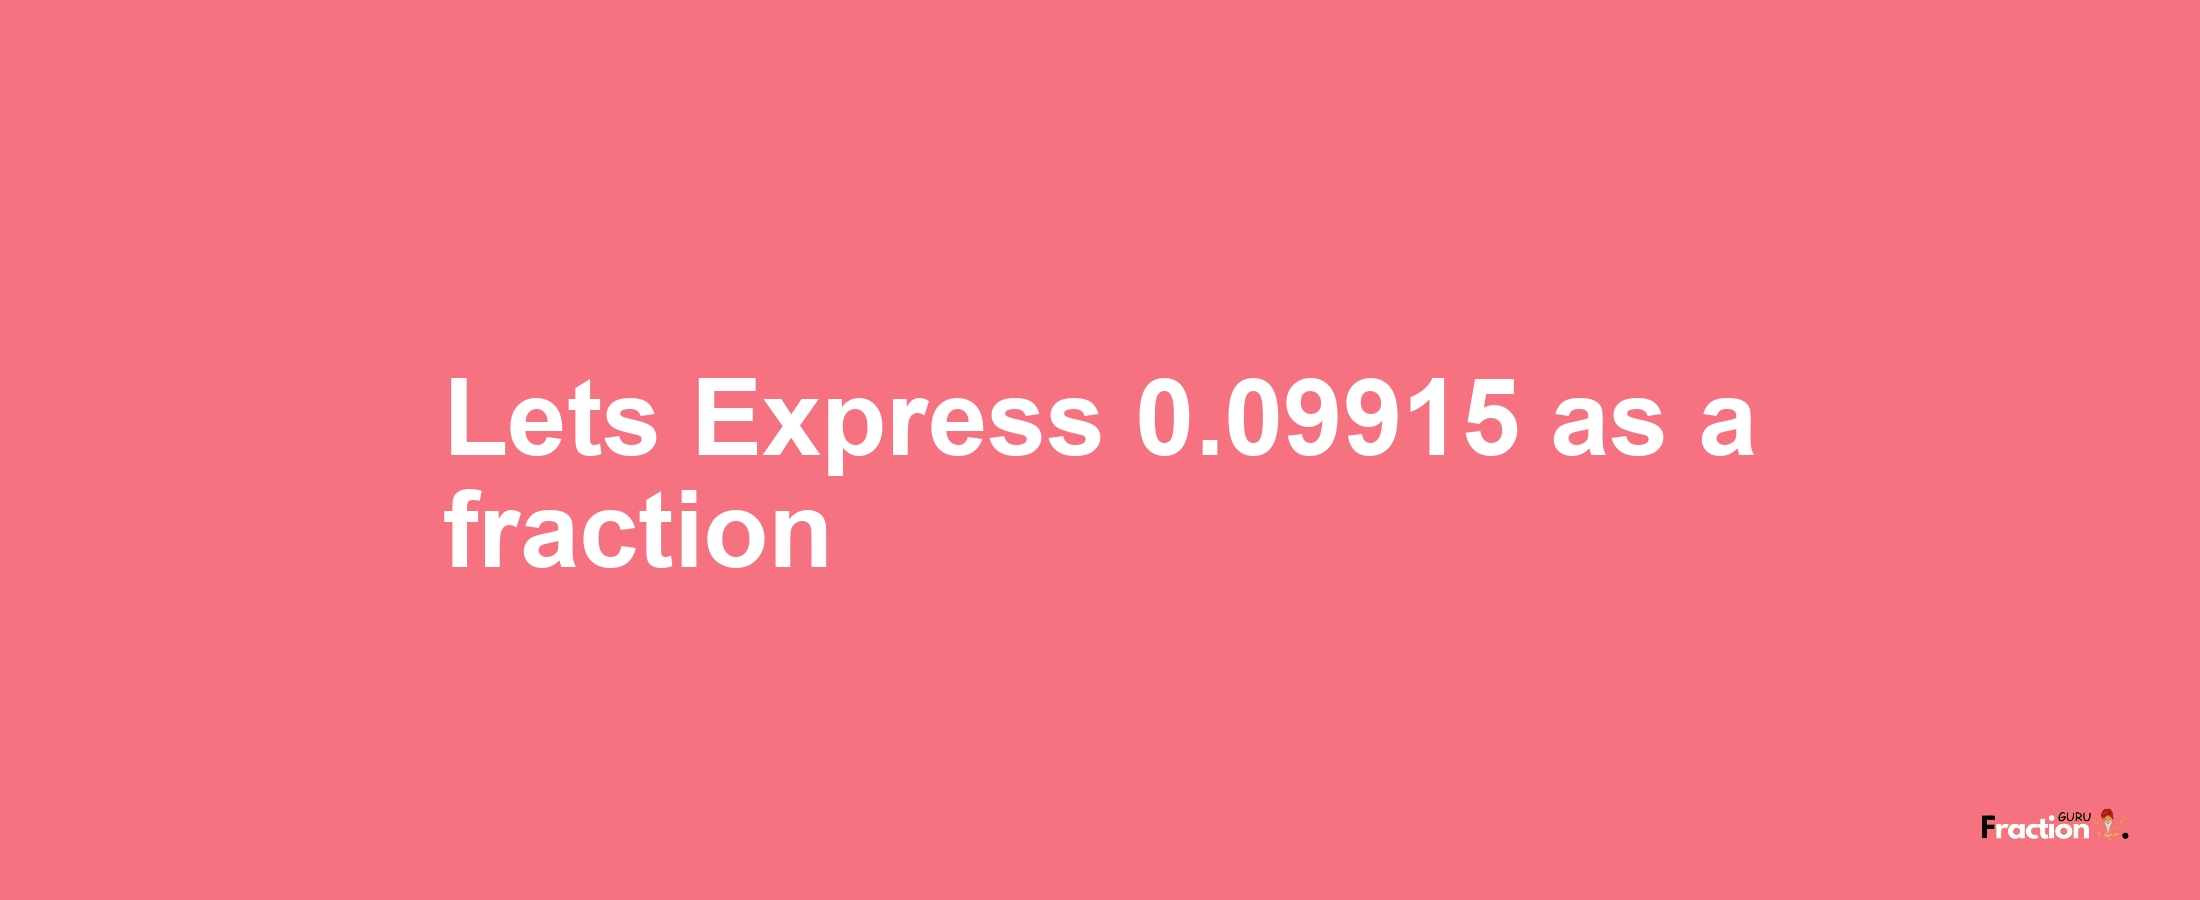 Lets Express 0.09915 as afraction